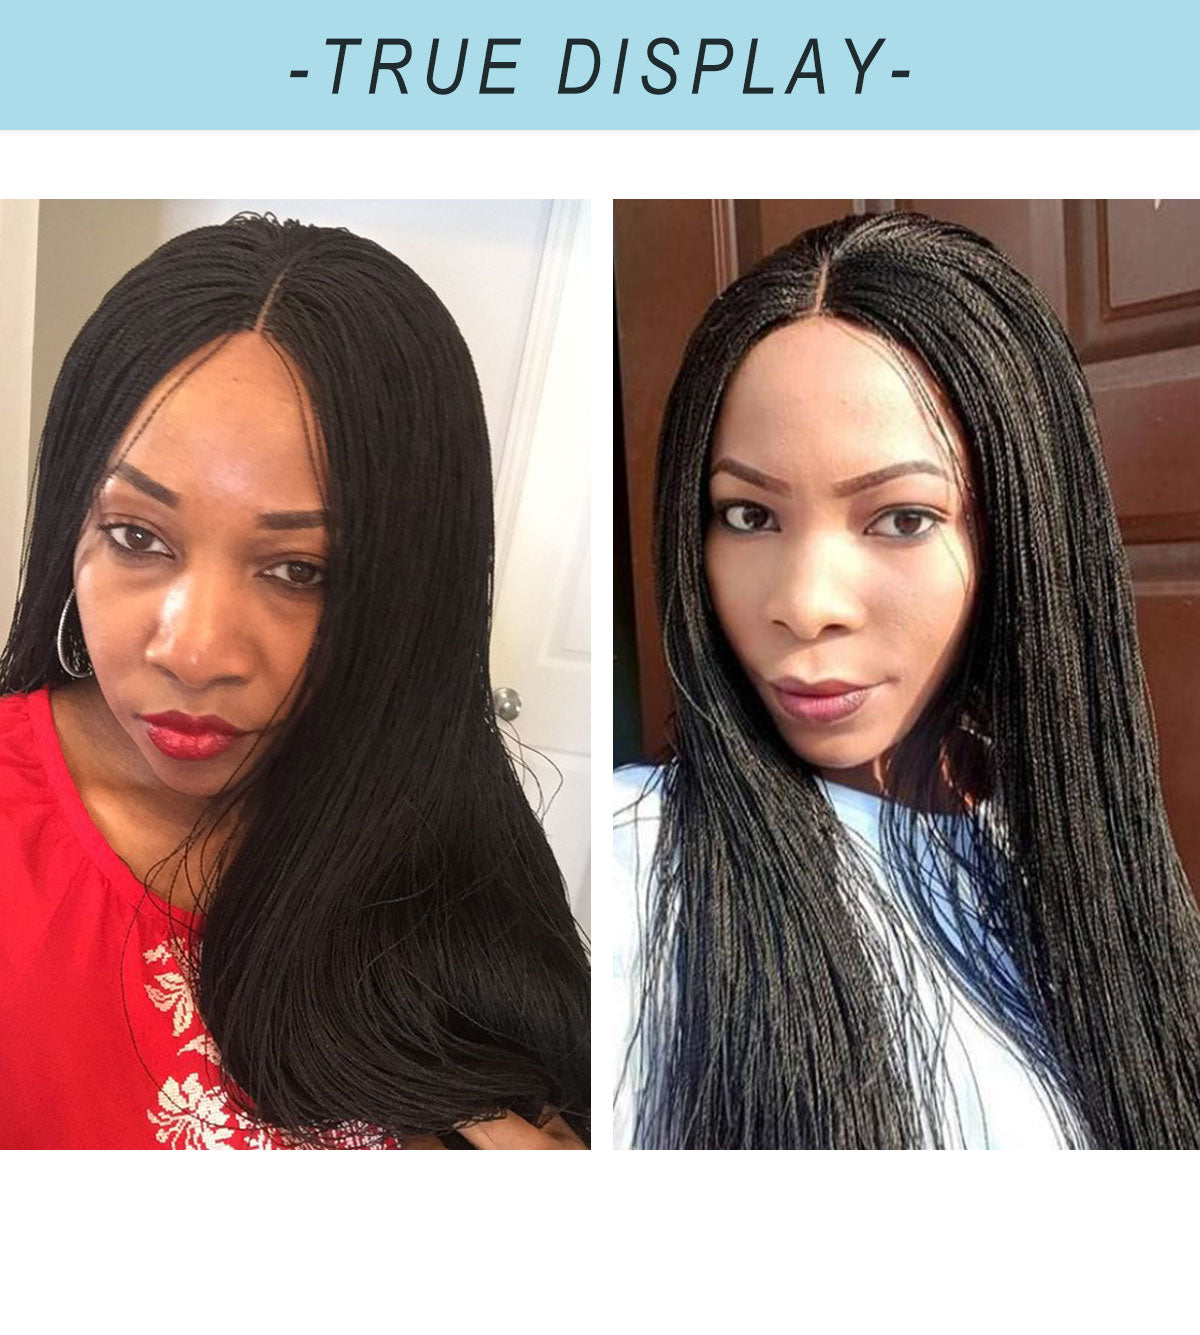 Goddess Lace Front Micro Million Twist Braided Wig with Baby Hair